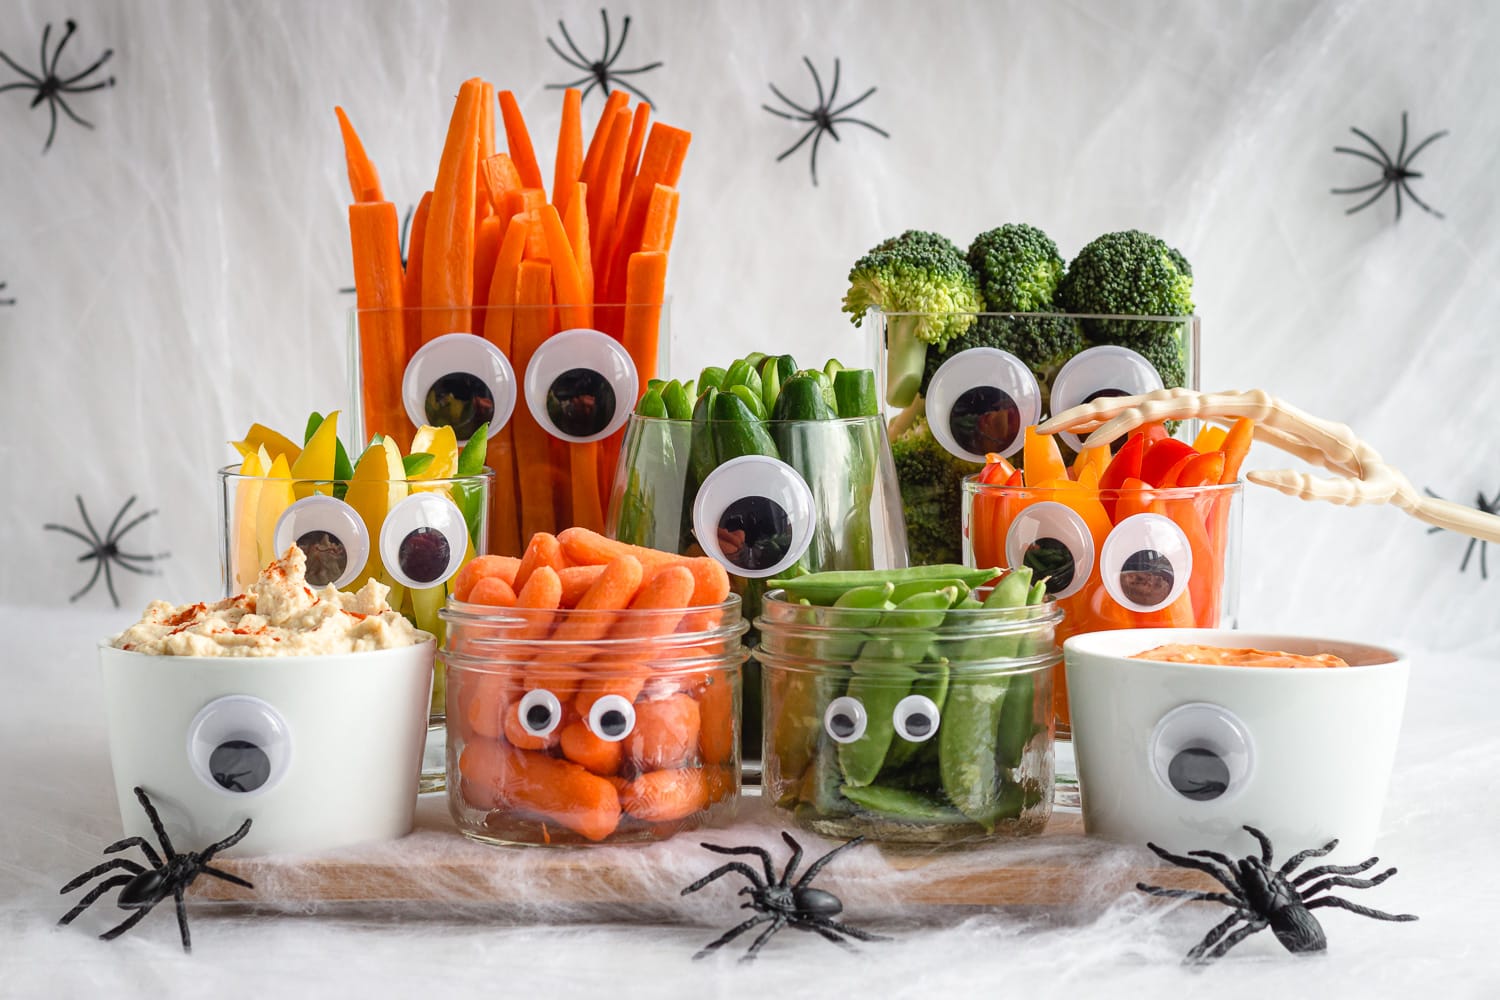 Halloween themed vegetables and dip surrounded by fake cobwebs and spiders.